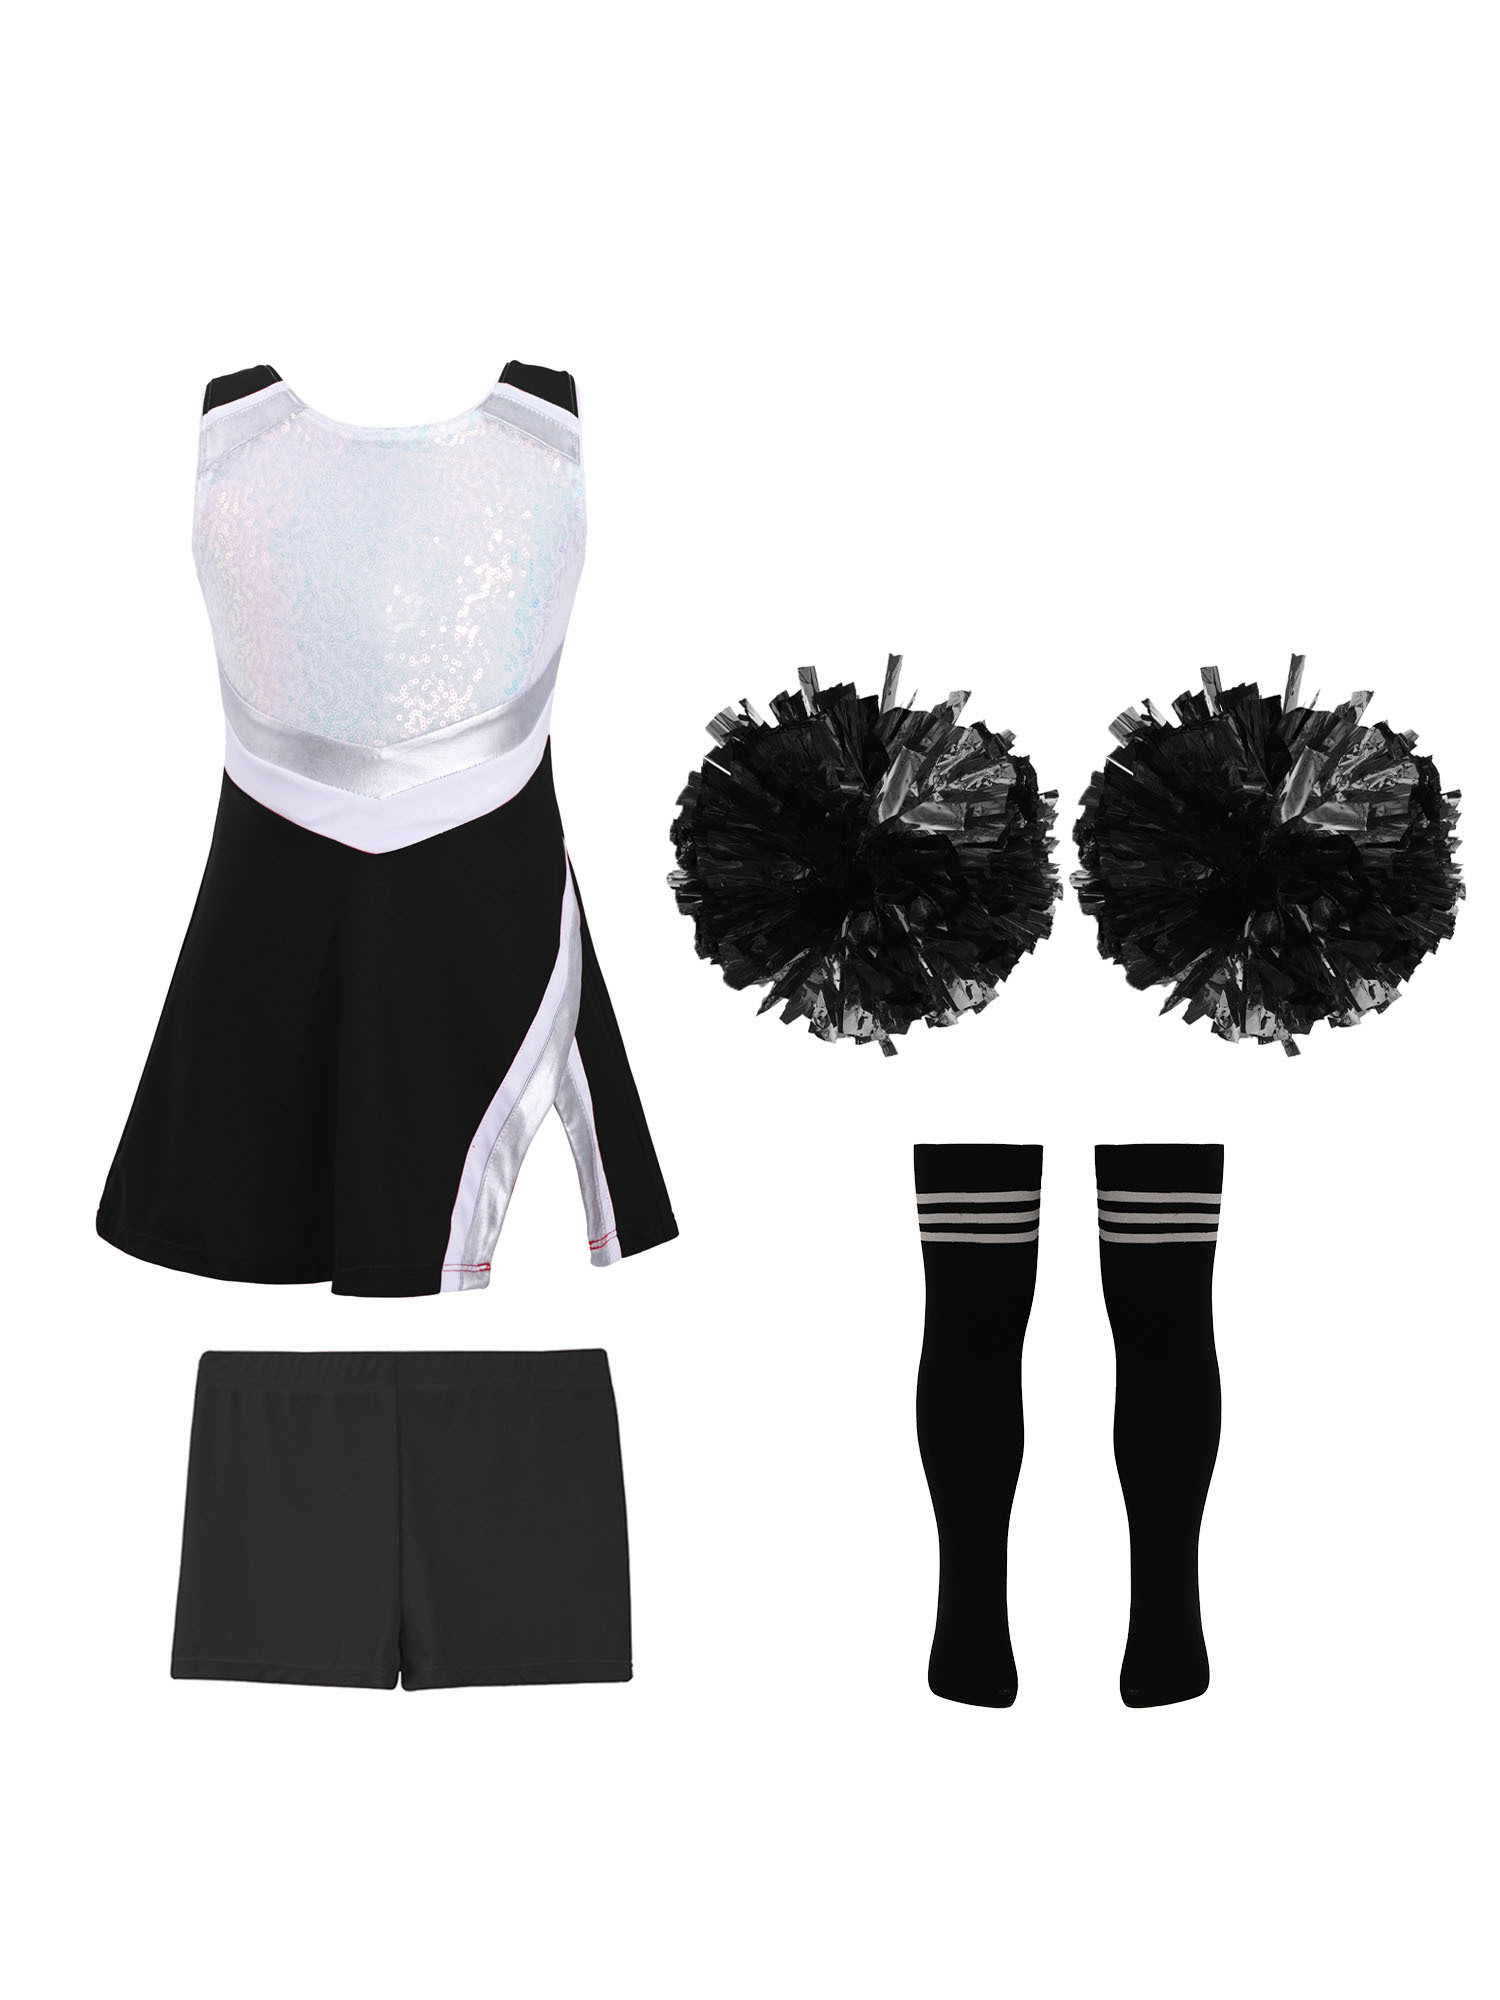 TiaoBug Kids Girls Cheer Leader Uniform Sports Games Cheerleading Dance Outfits Halloween Carnival Fancy Dress Up A Black&White-A 14 - image 1 of 5